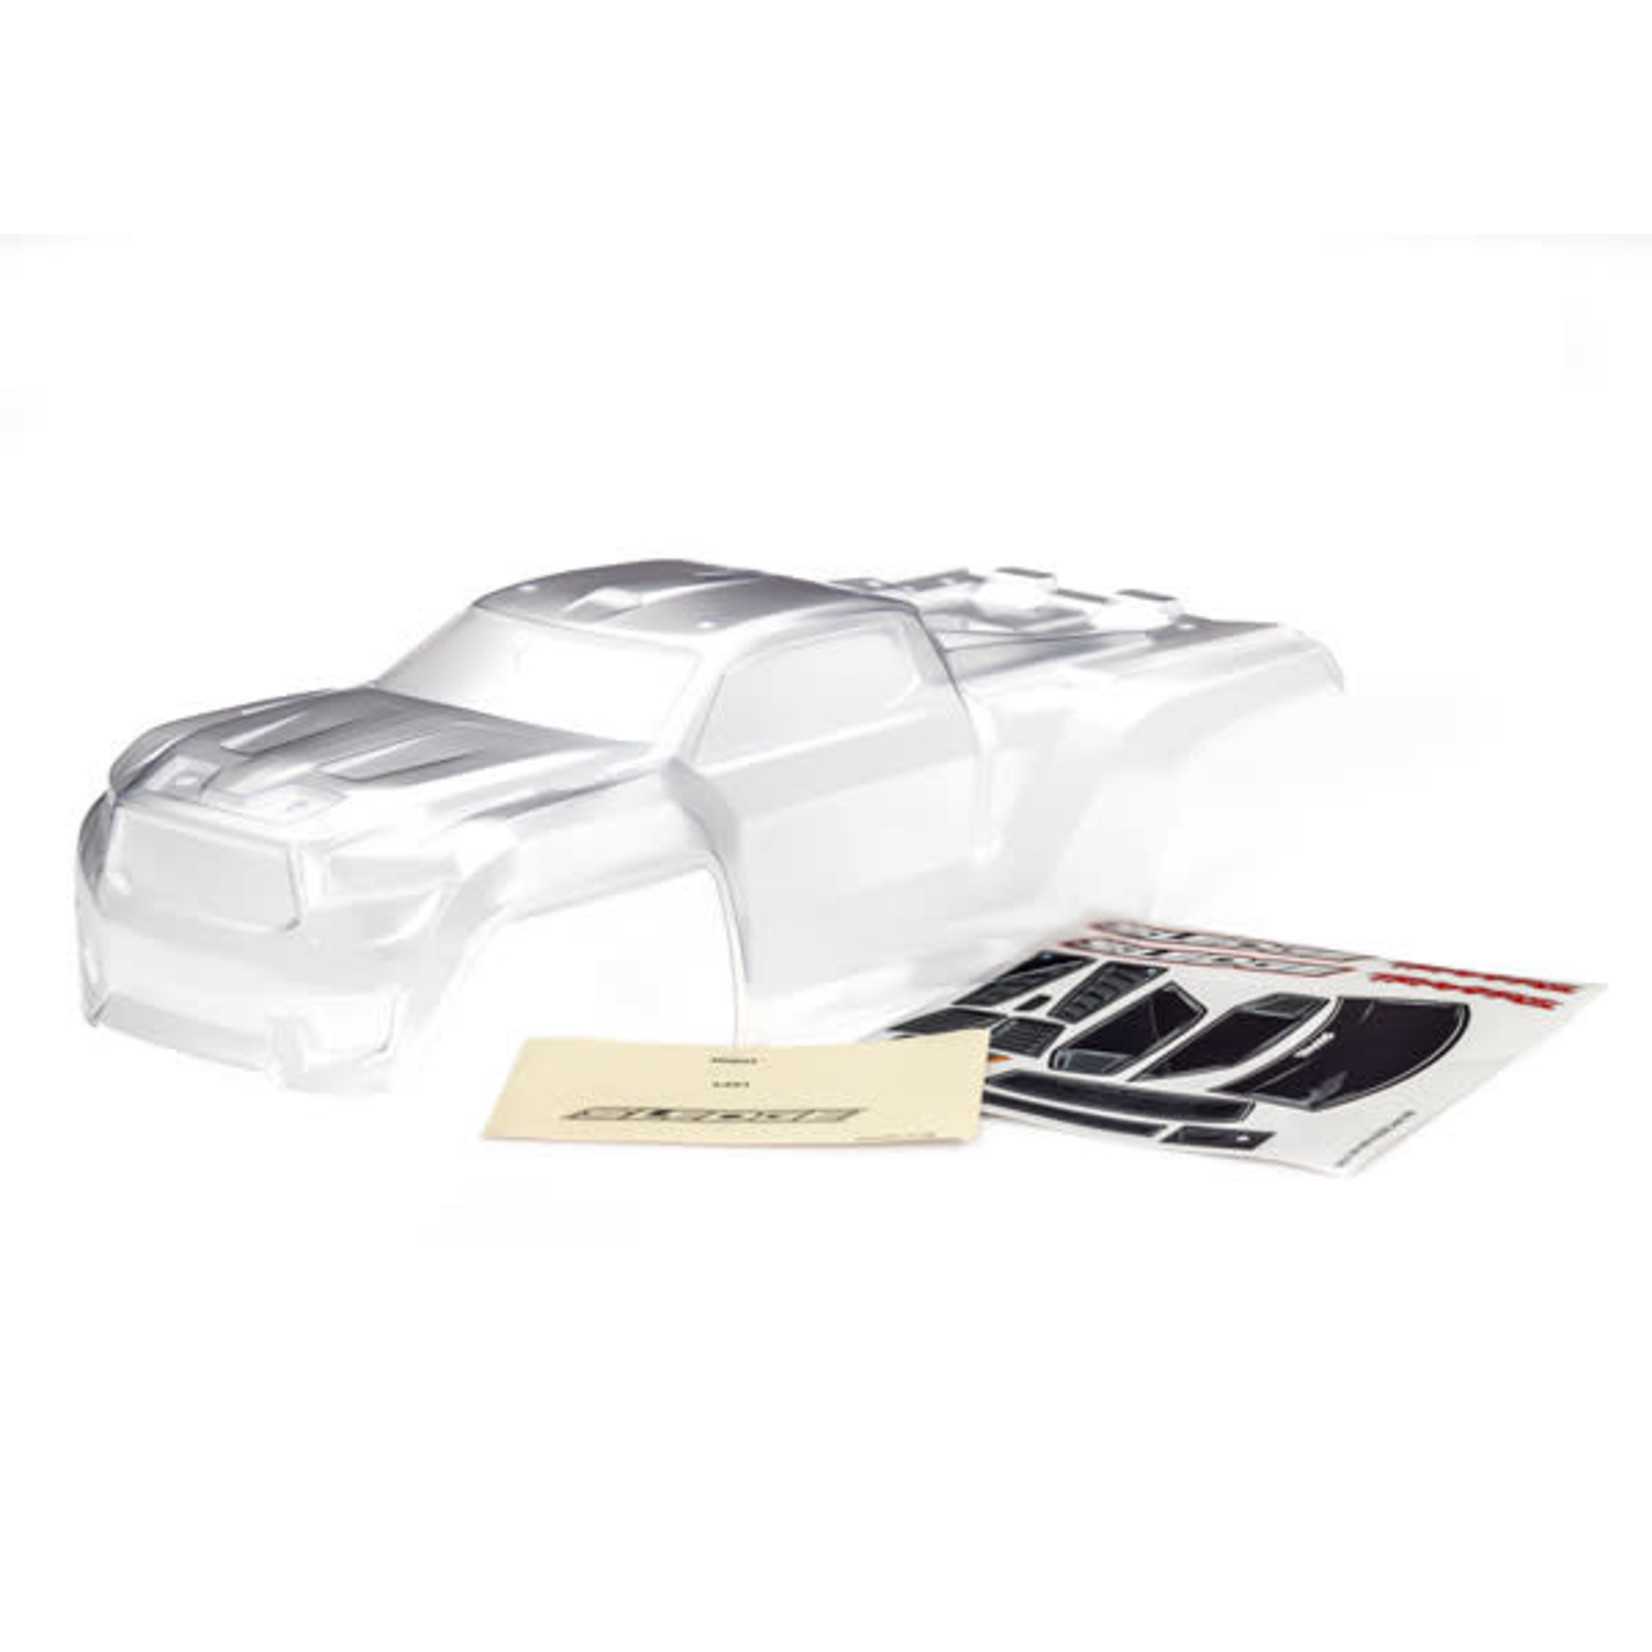 Traxxas Traxxas Sledge Body With Decals (Clear) #9511